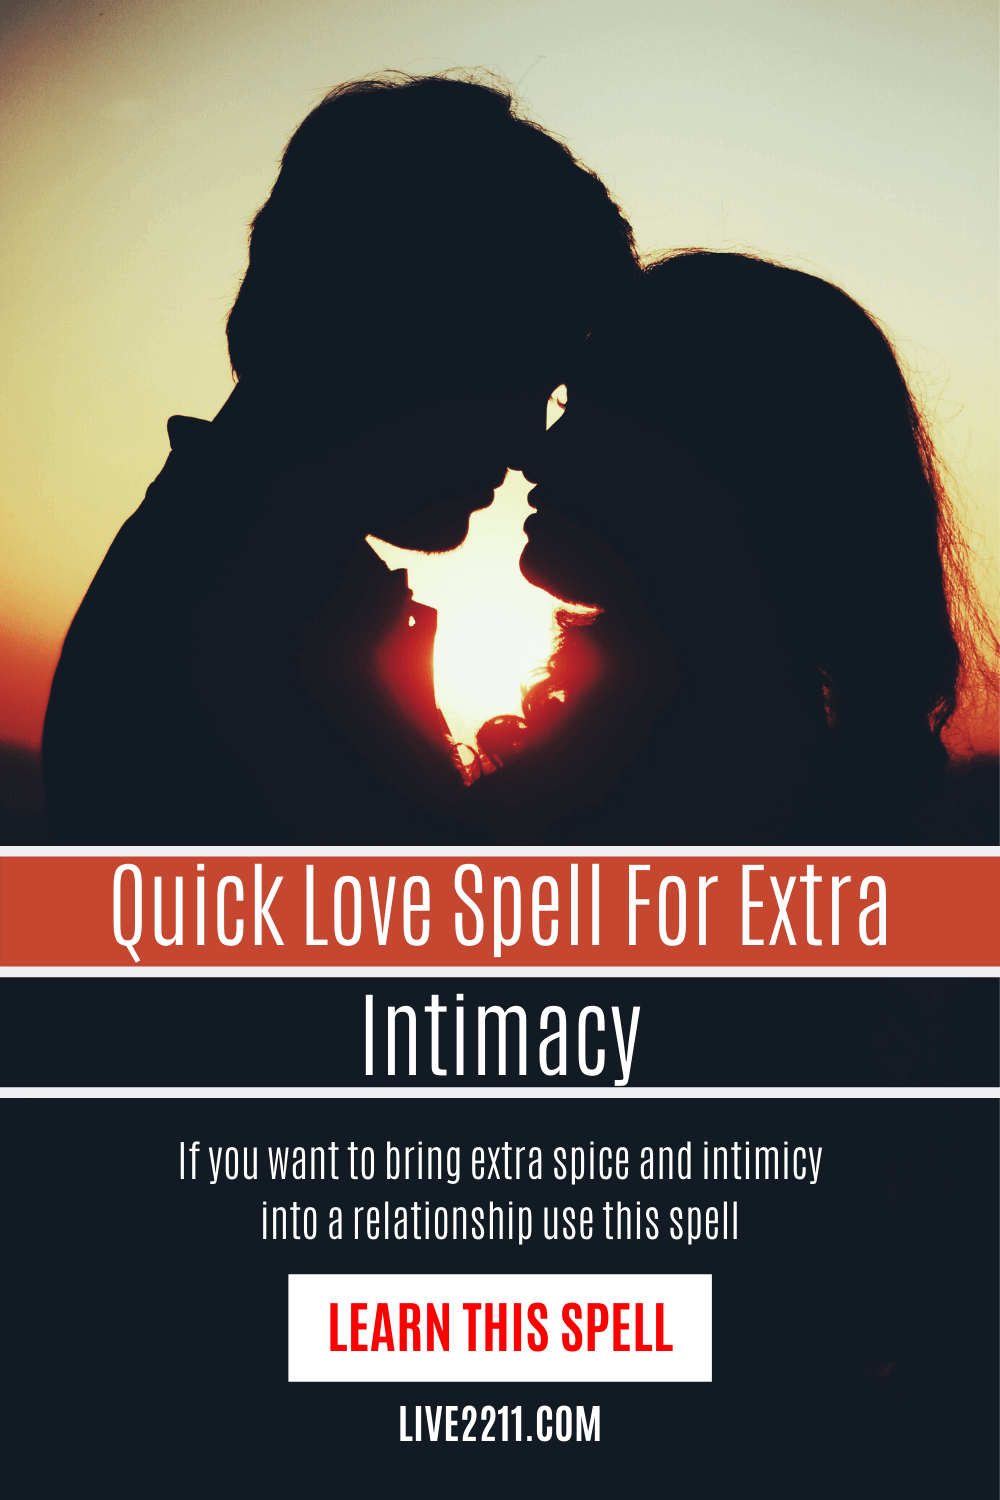 Quick Love Spell For Extra Intimacy Pin 2